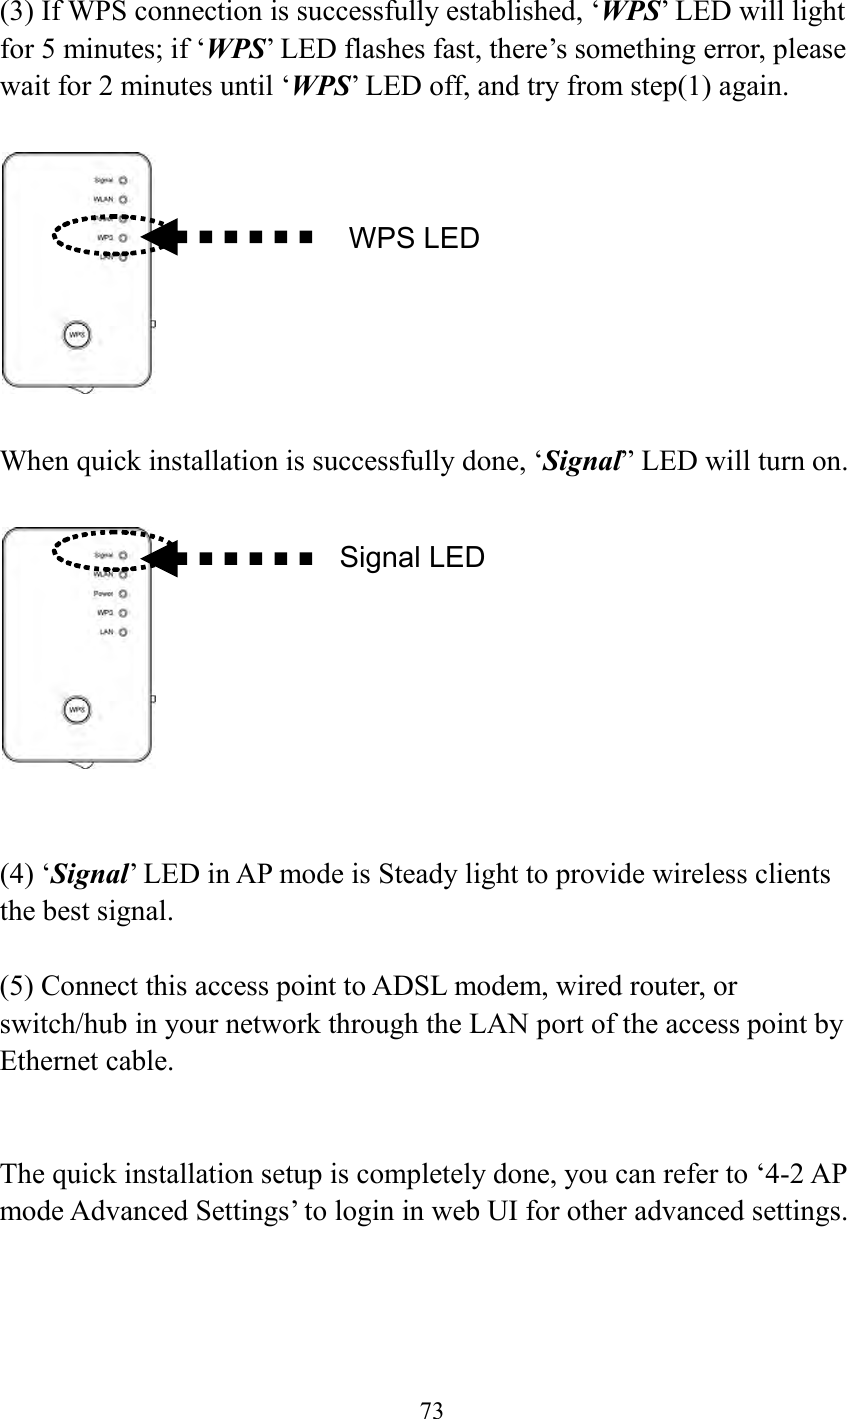  73   (3) If WPS connection is successfully established, ‘WPS’ LED will light for 5 minutes; if ‘WPS’ LED flashes fast, there’s something error, please wait for 2 minutes until ‘WPS’ LED off, and try from step(1) again.      When quick installation is successfully done, ‘Signal” LED will turn on.     (4) ‘Signal’ LED in AP mode is Steady light to provide wireless clients the best signal.    (5) Connect this access point to ADSL modem, wired router, or switch/hub in your network through the LAN port of the access point by Ethernet cable.   The quick installation setup is completely done, you can refer to ‘4-2 AP mode Advanced Settings’ to login in web UI for other advanced settings.       WPS LED Signal LED 